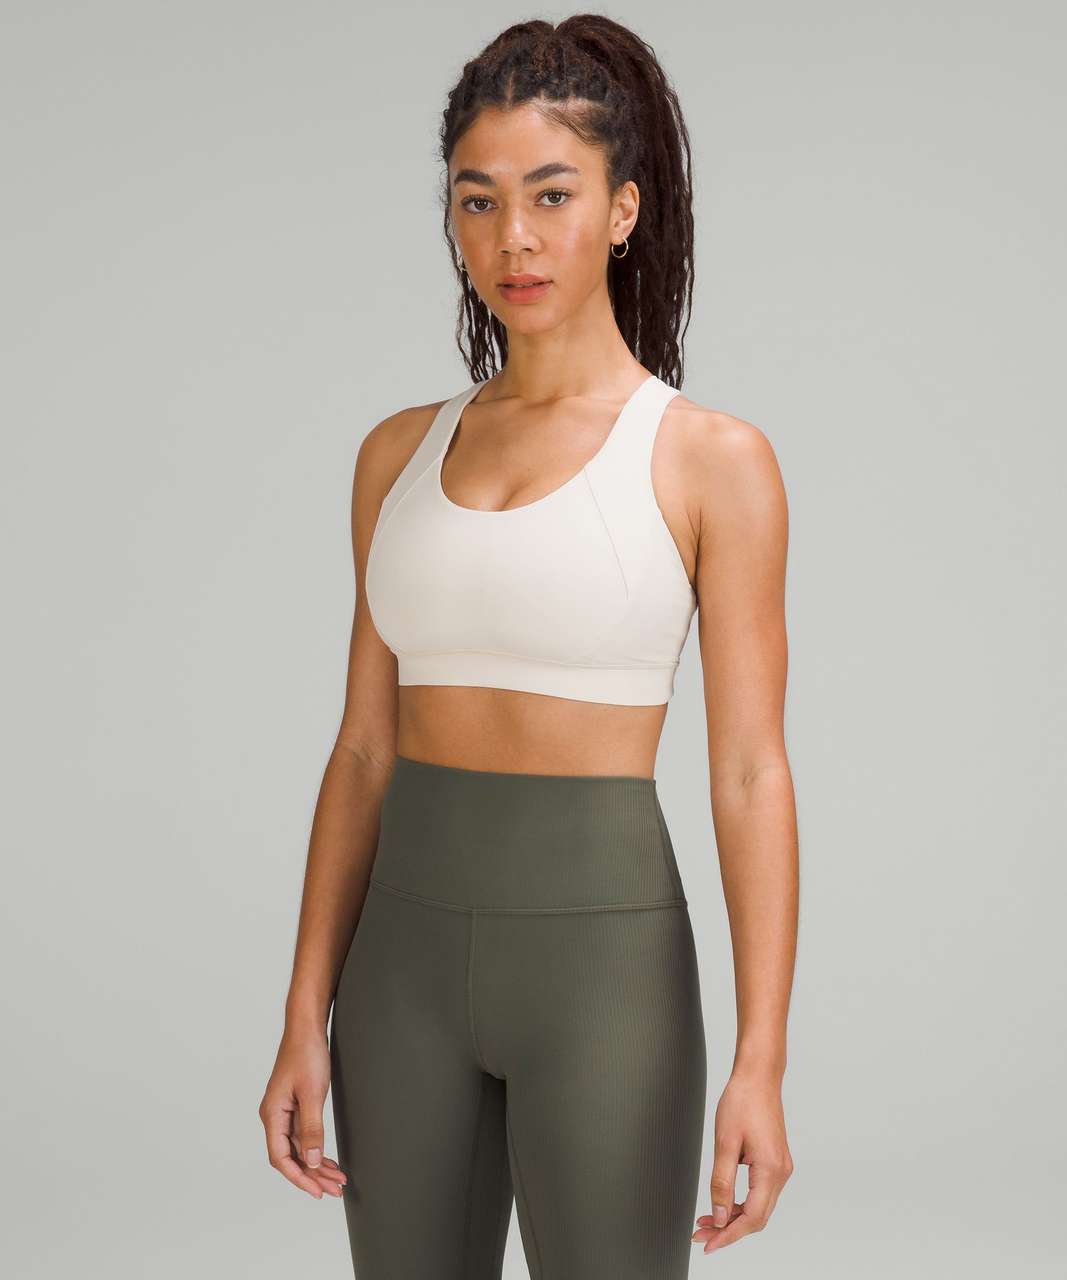 Lululemon Free to Be Elevated Bra *Light Support, DD/DDD(E) Cup - White Opal